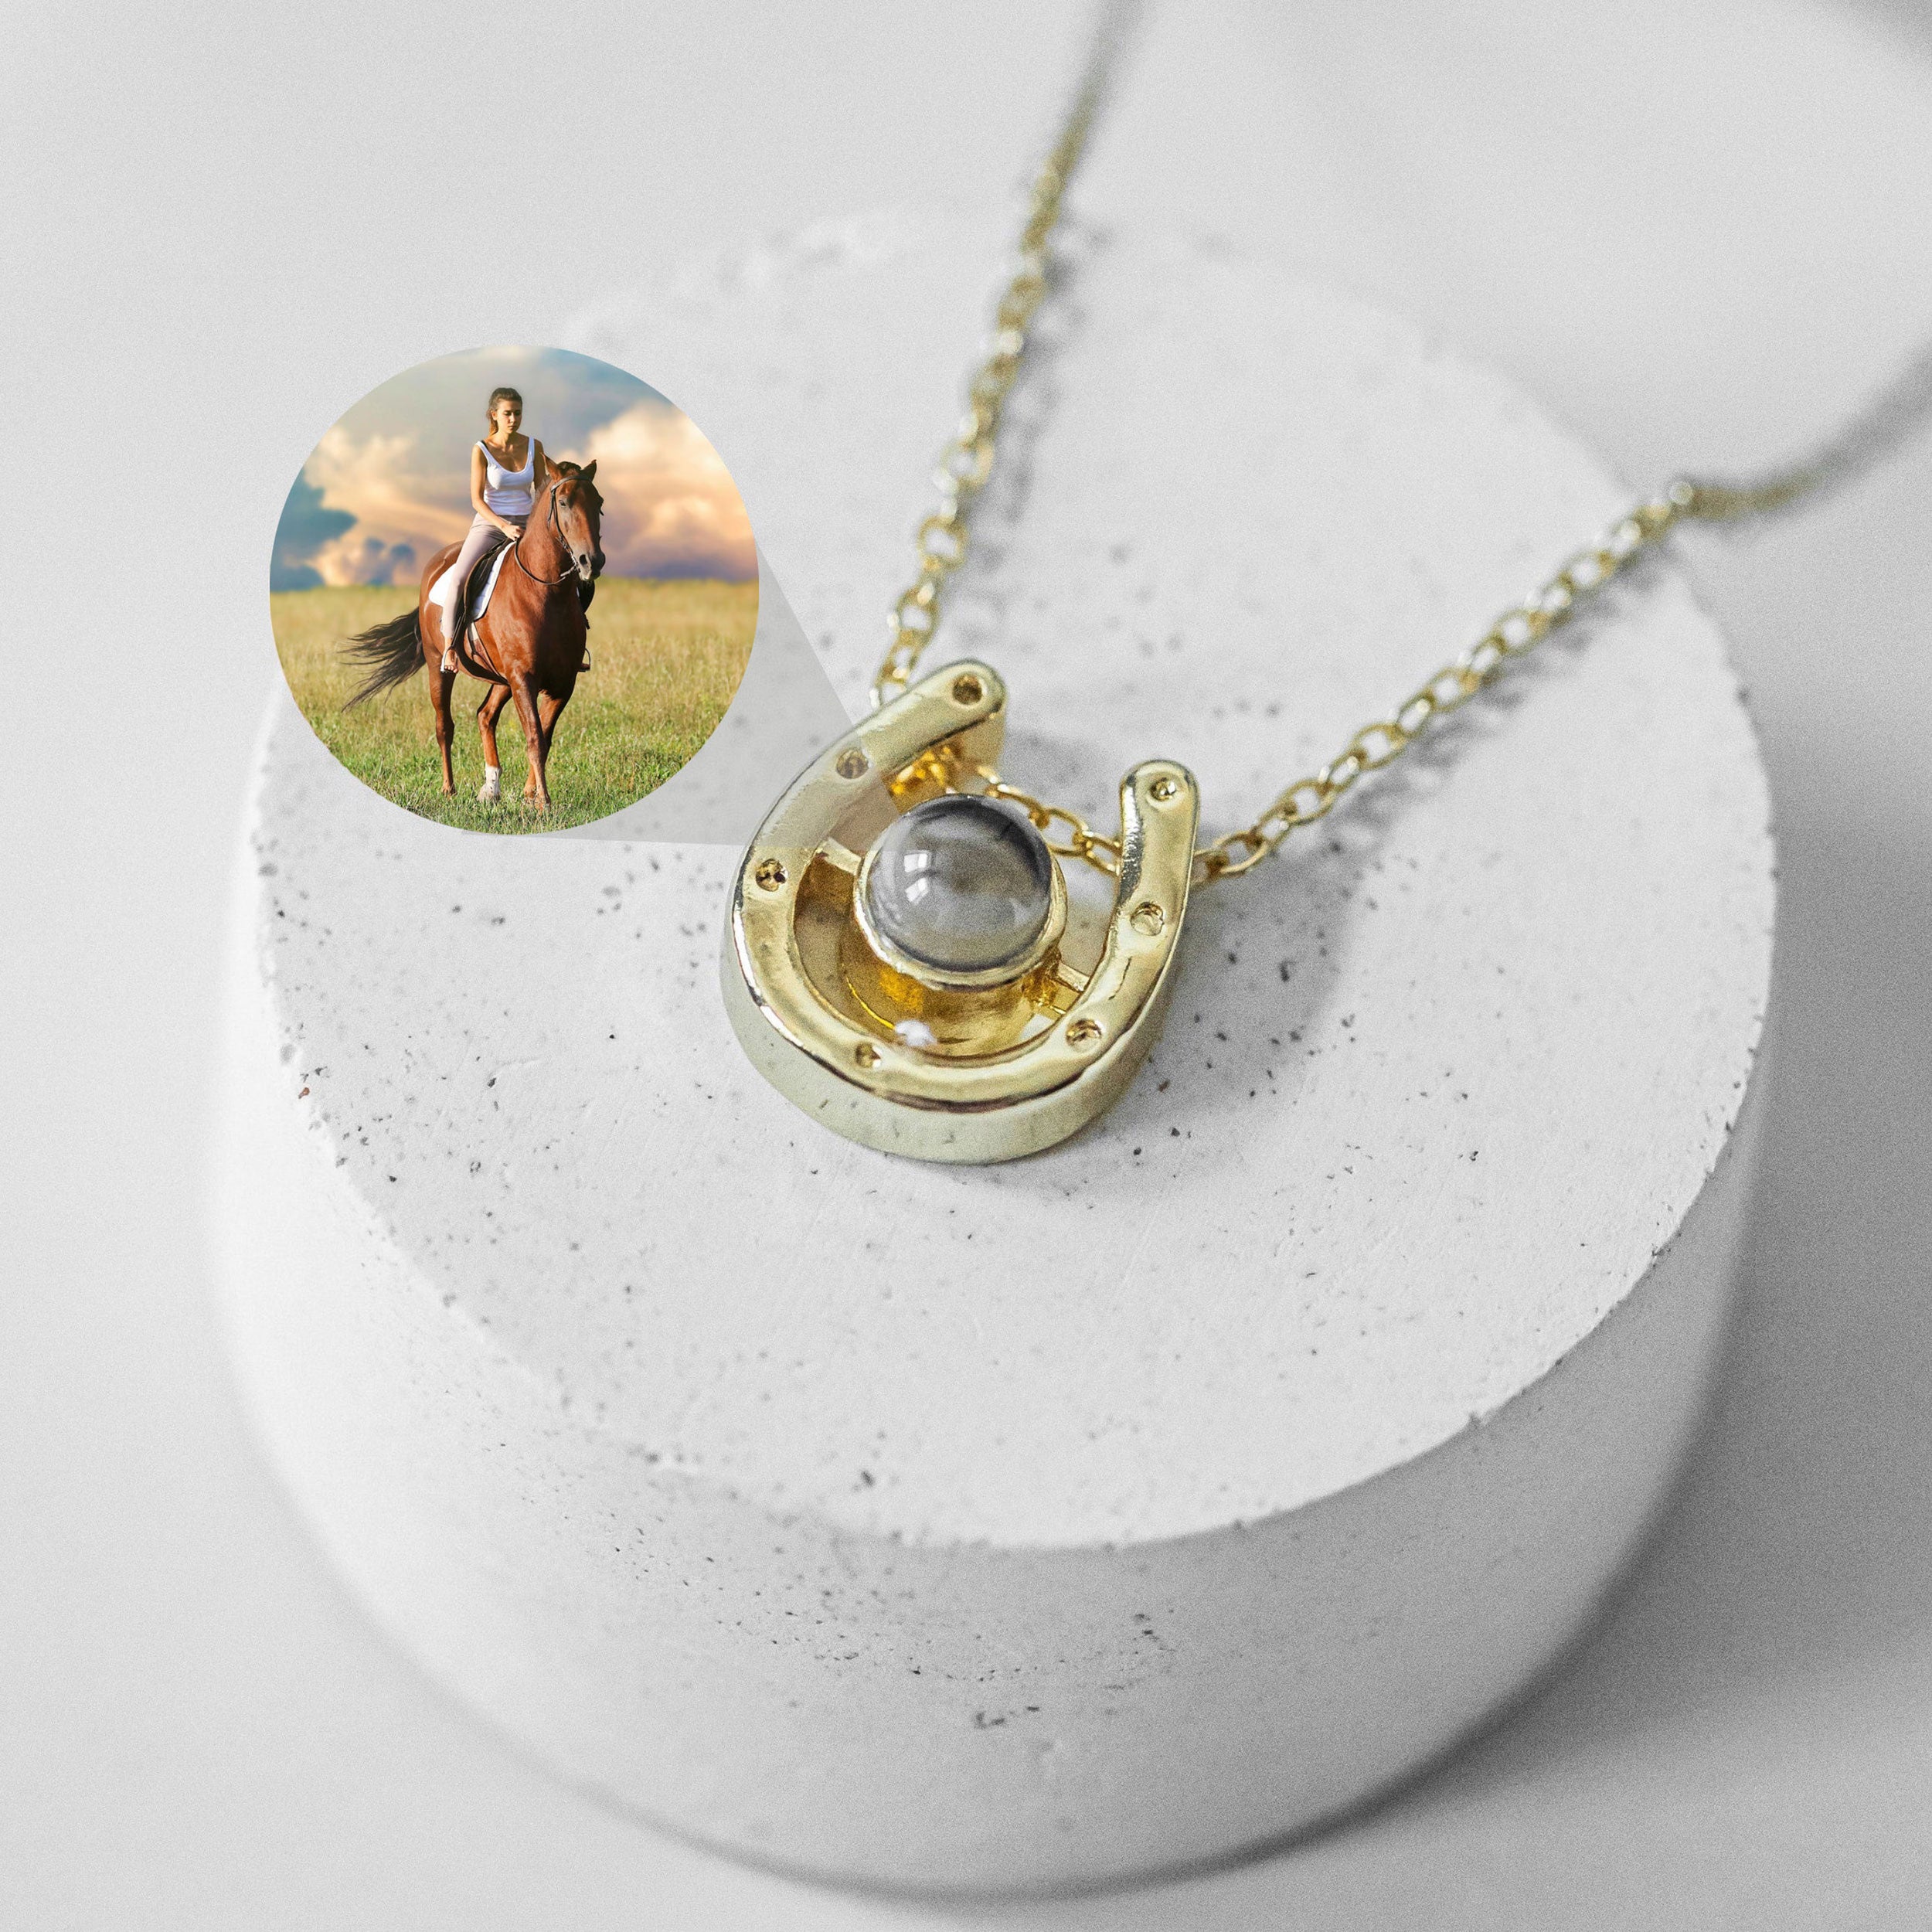 Custom Horse Photo Projection Necklace, Personalized Memorial Picture Necklace